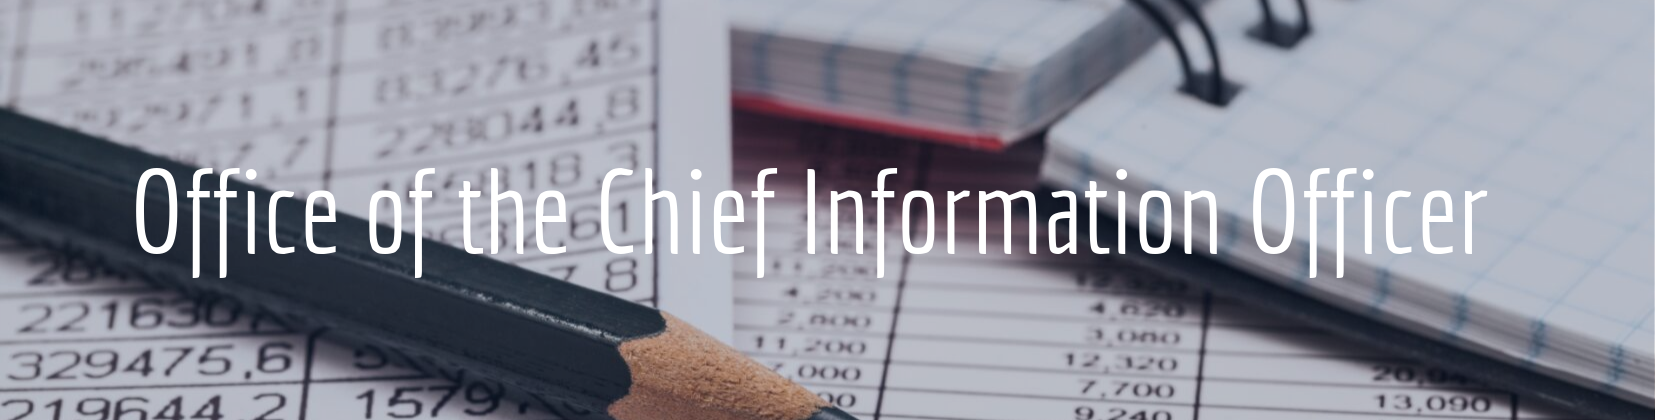 Office of the Chief Information Officer banner